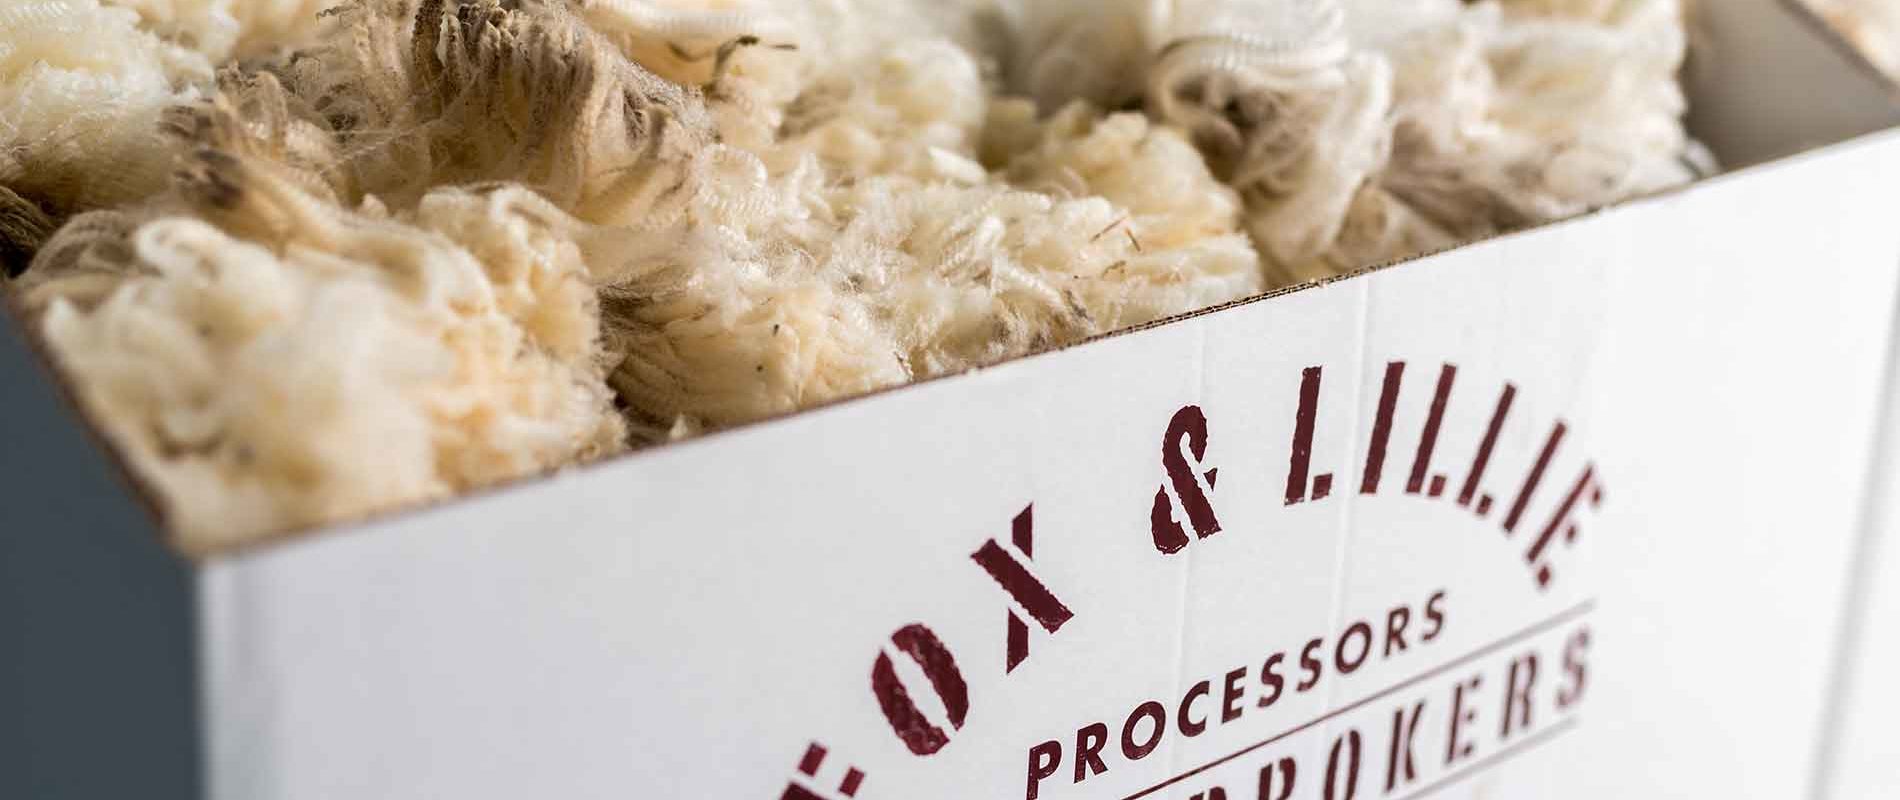 Wool Grower Services